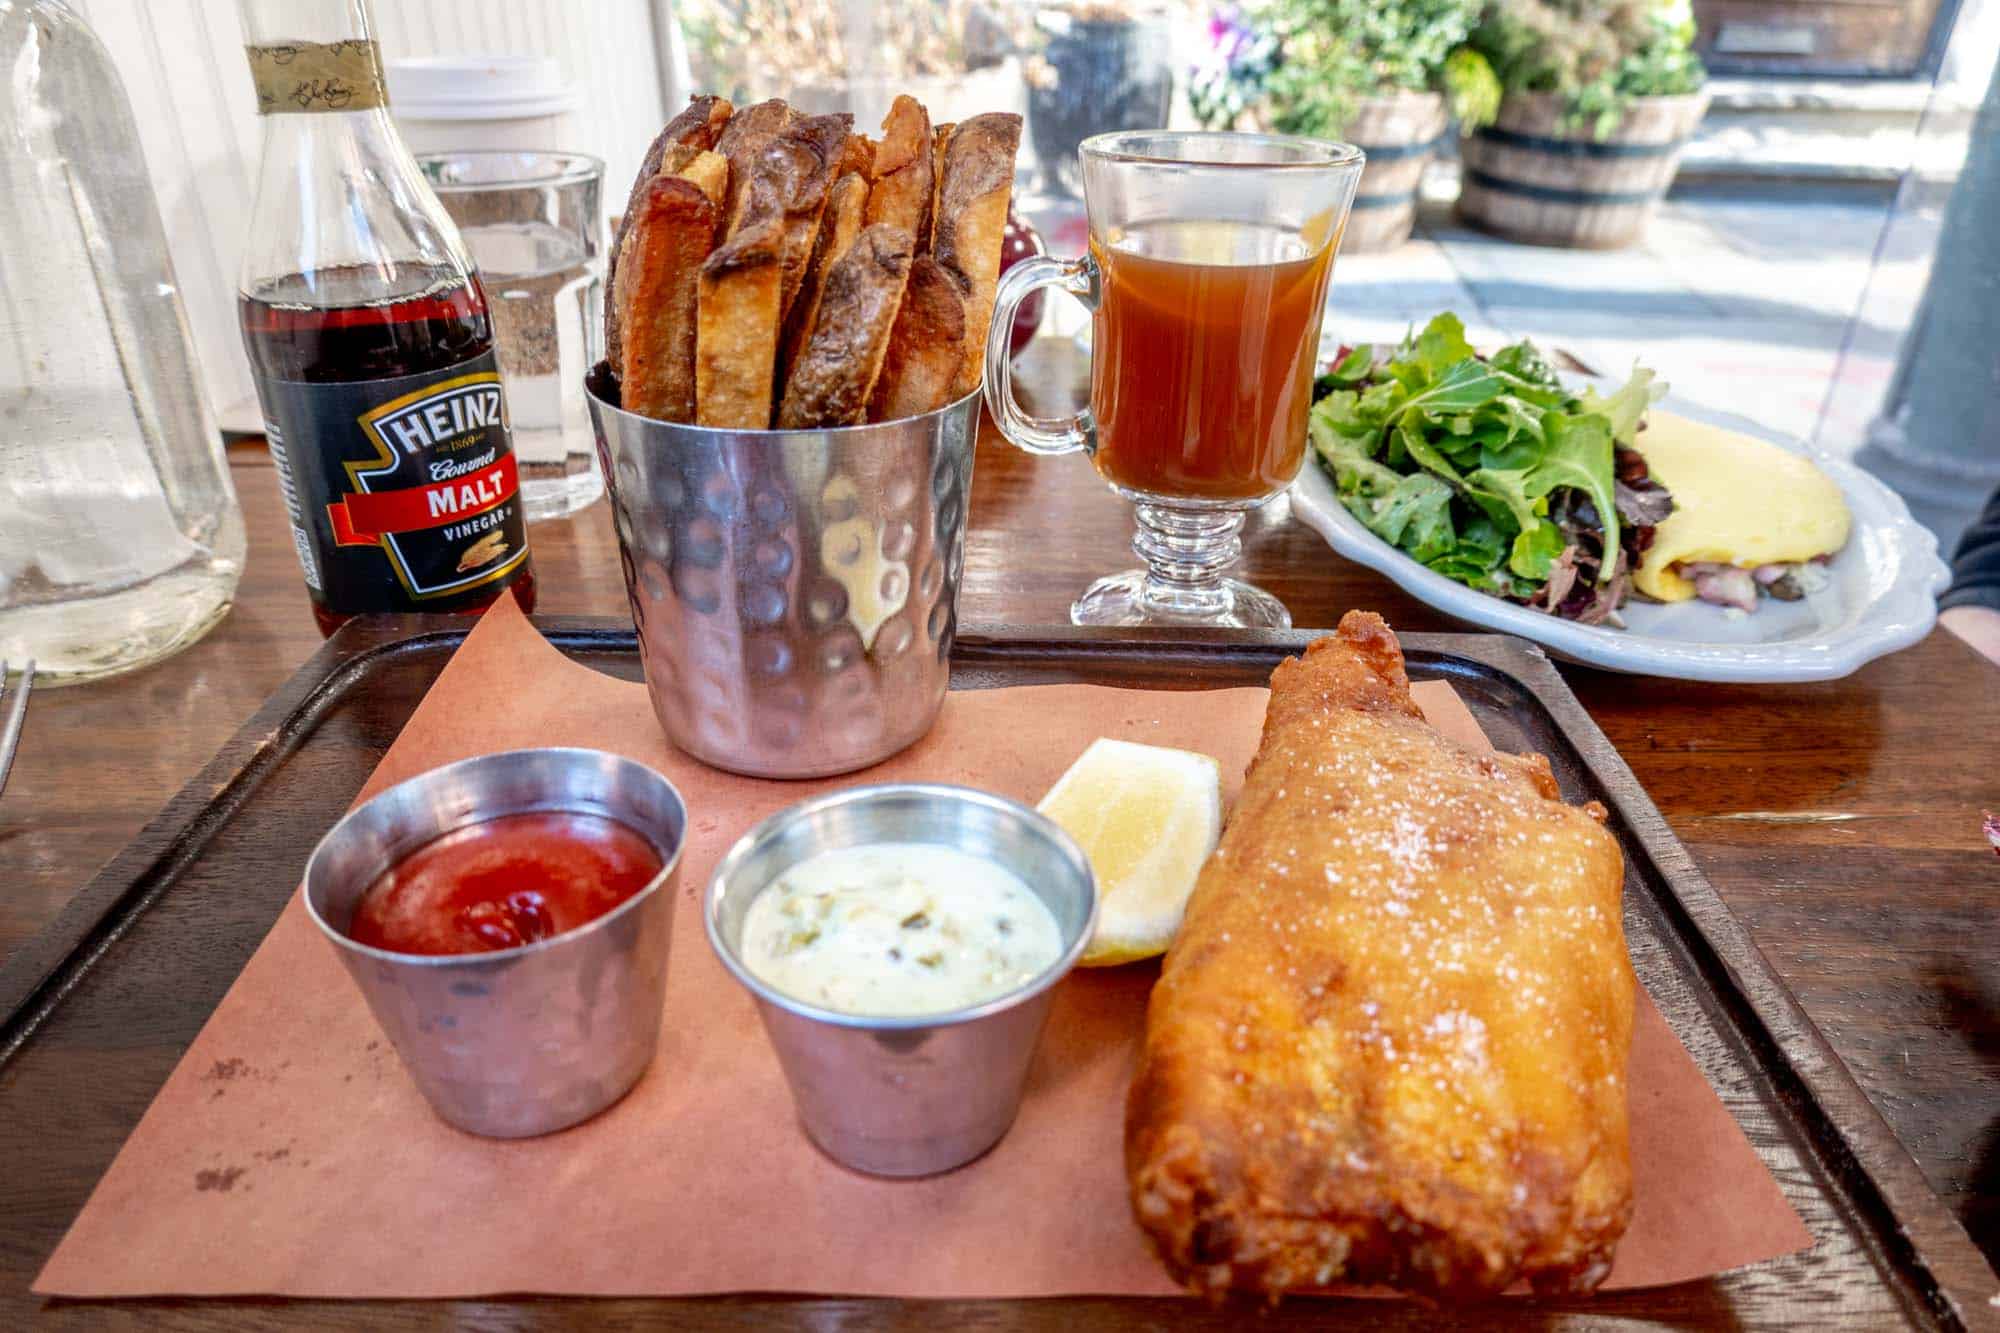 Fish and chips on a wooden platter with a hot toddy cocktail and omelet in the background